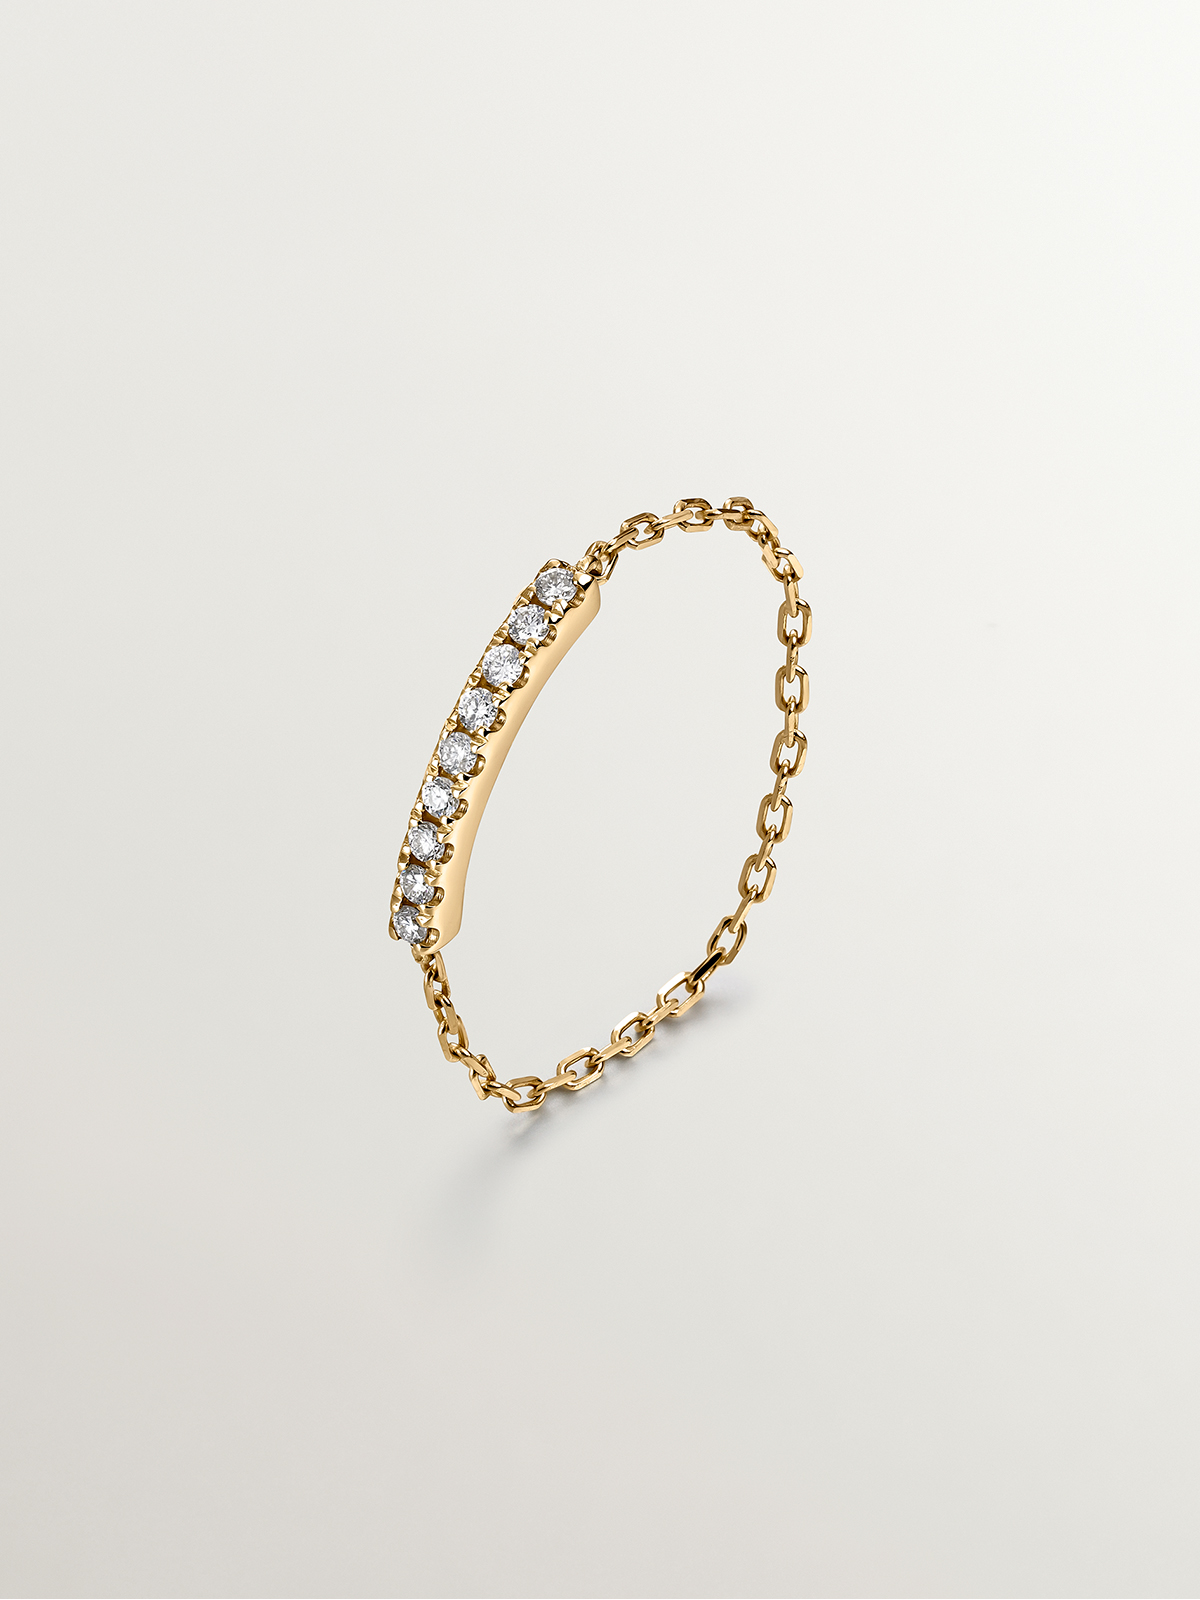 18K Yellow Gold Chain Ring with Diamonds